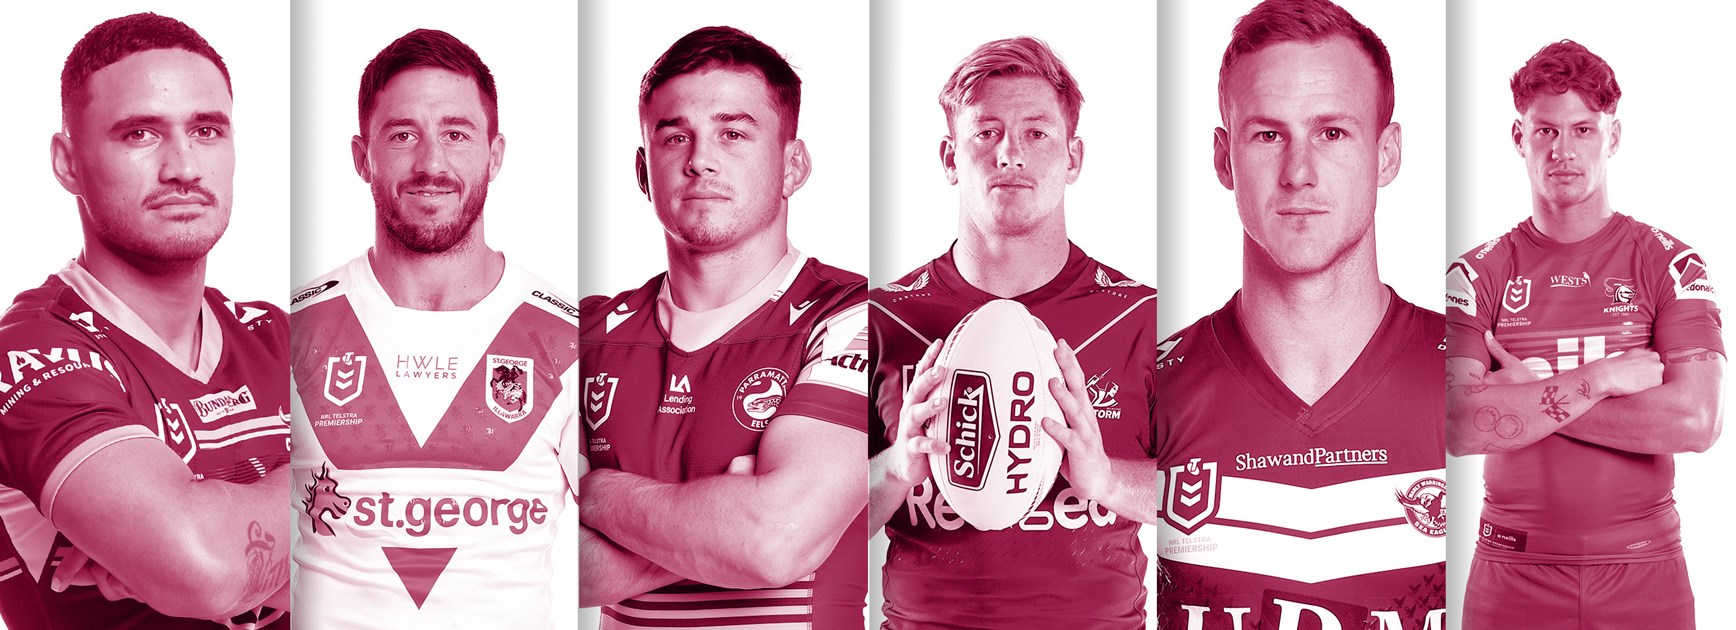 Ranking the Maroons spine candidates for 2021 Origin